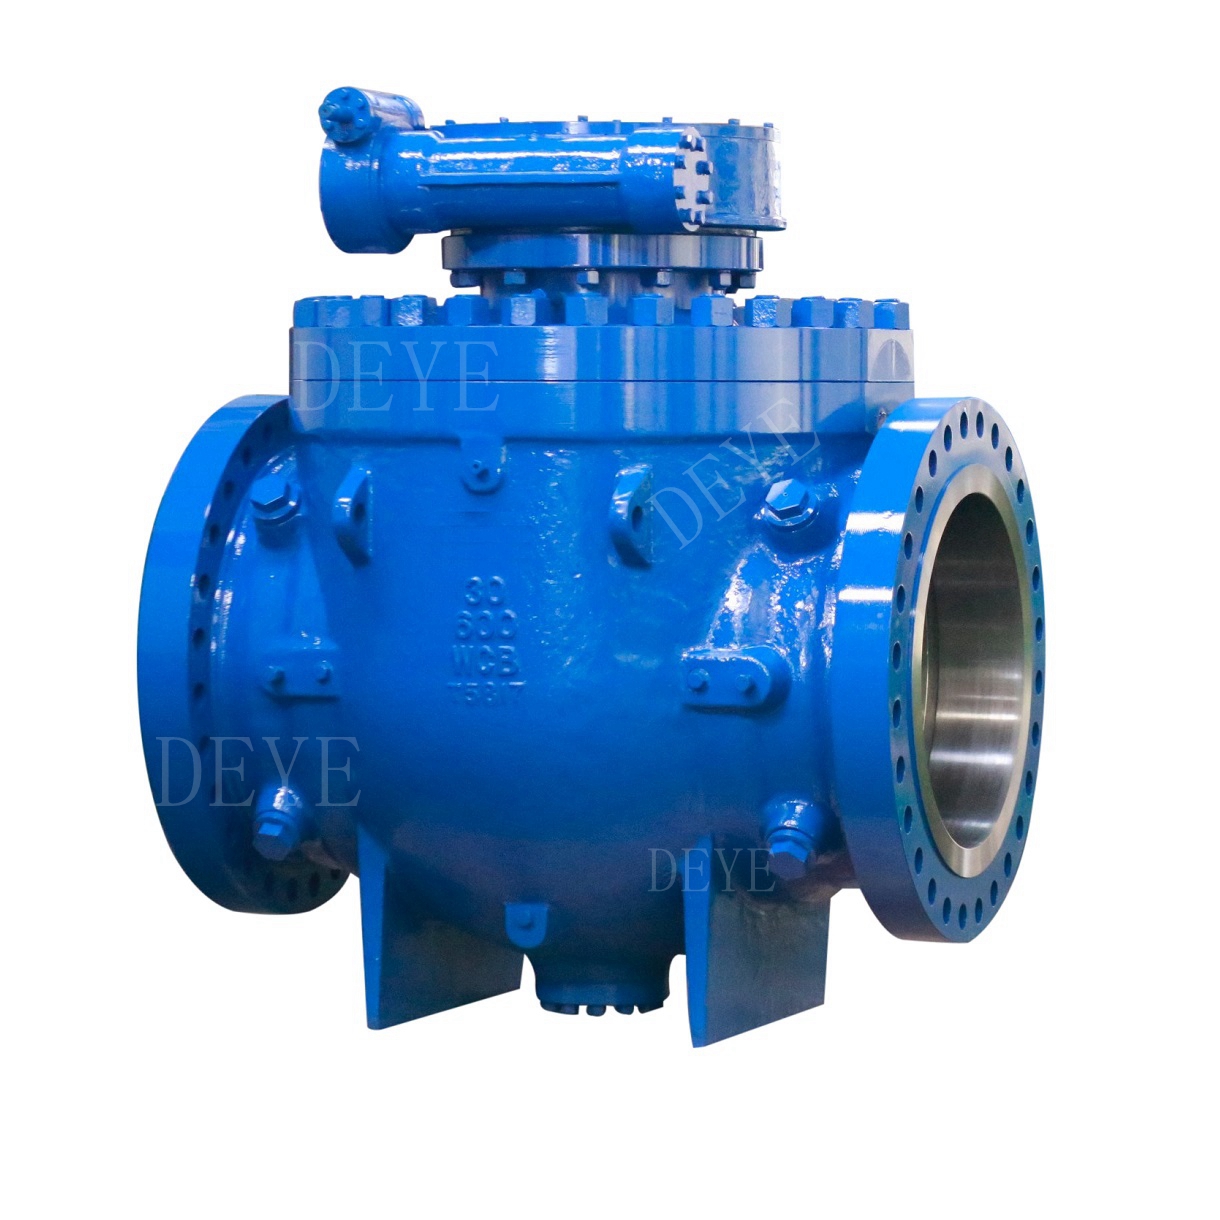 China Manufacturer for Api 2500lbs Gate Valve -
 DN750 30INCH flanged trunnion mounted top entry ball valve ( BV-600-30F) – Deye